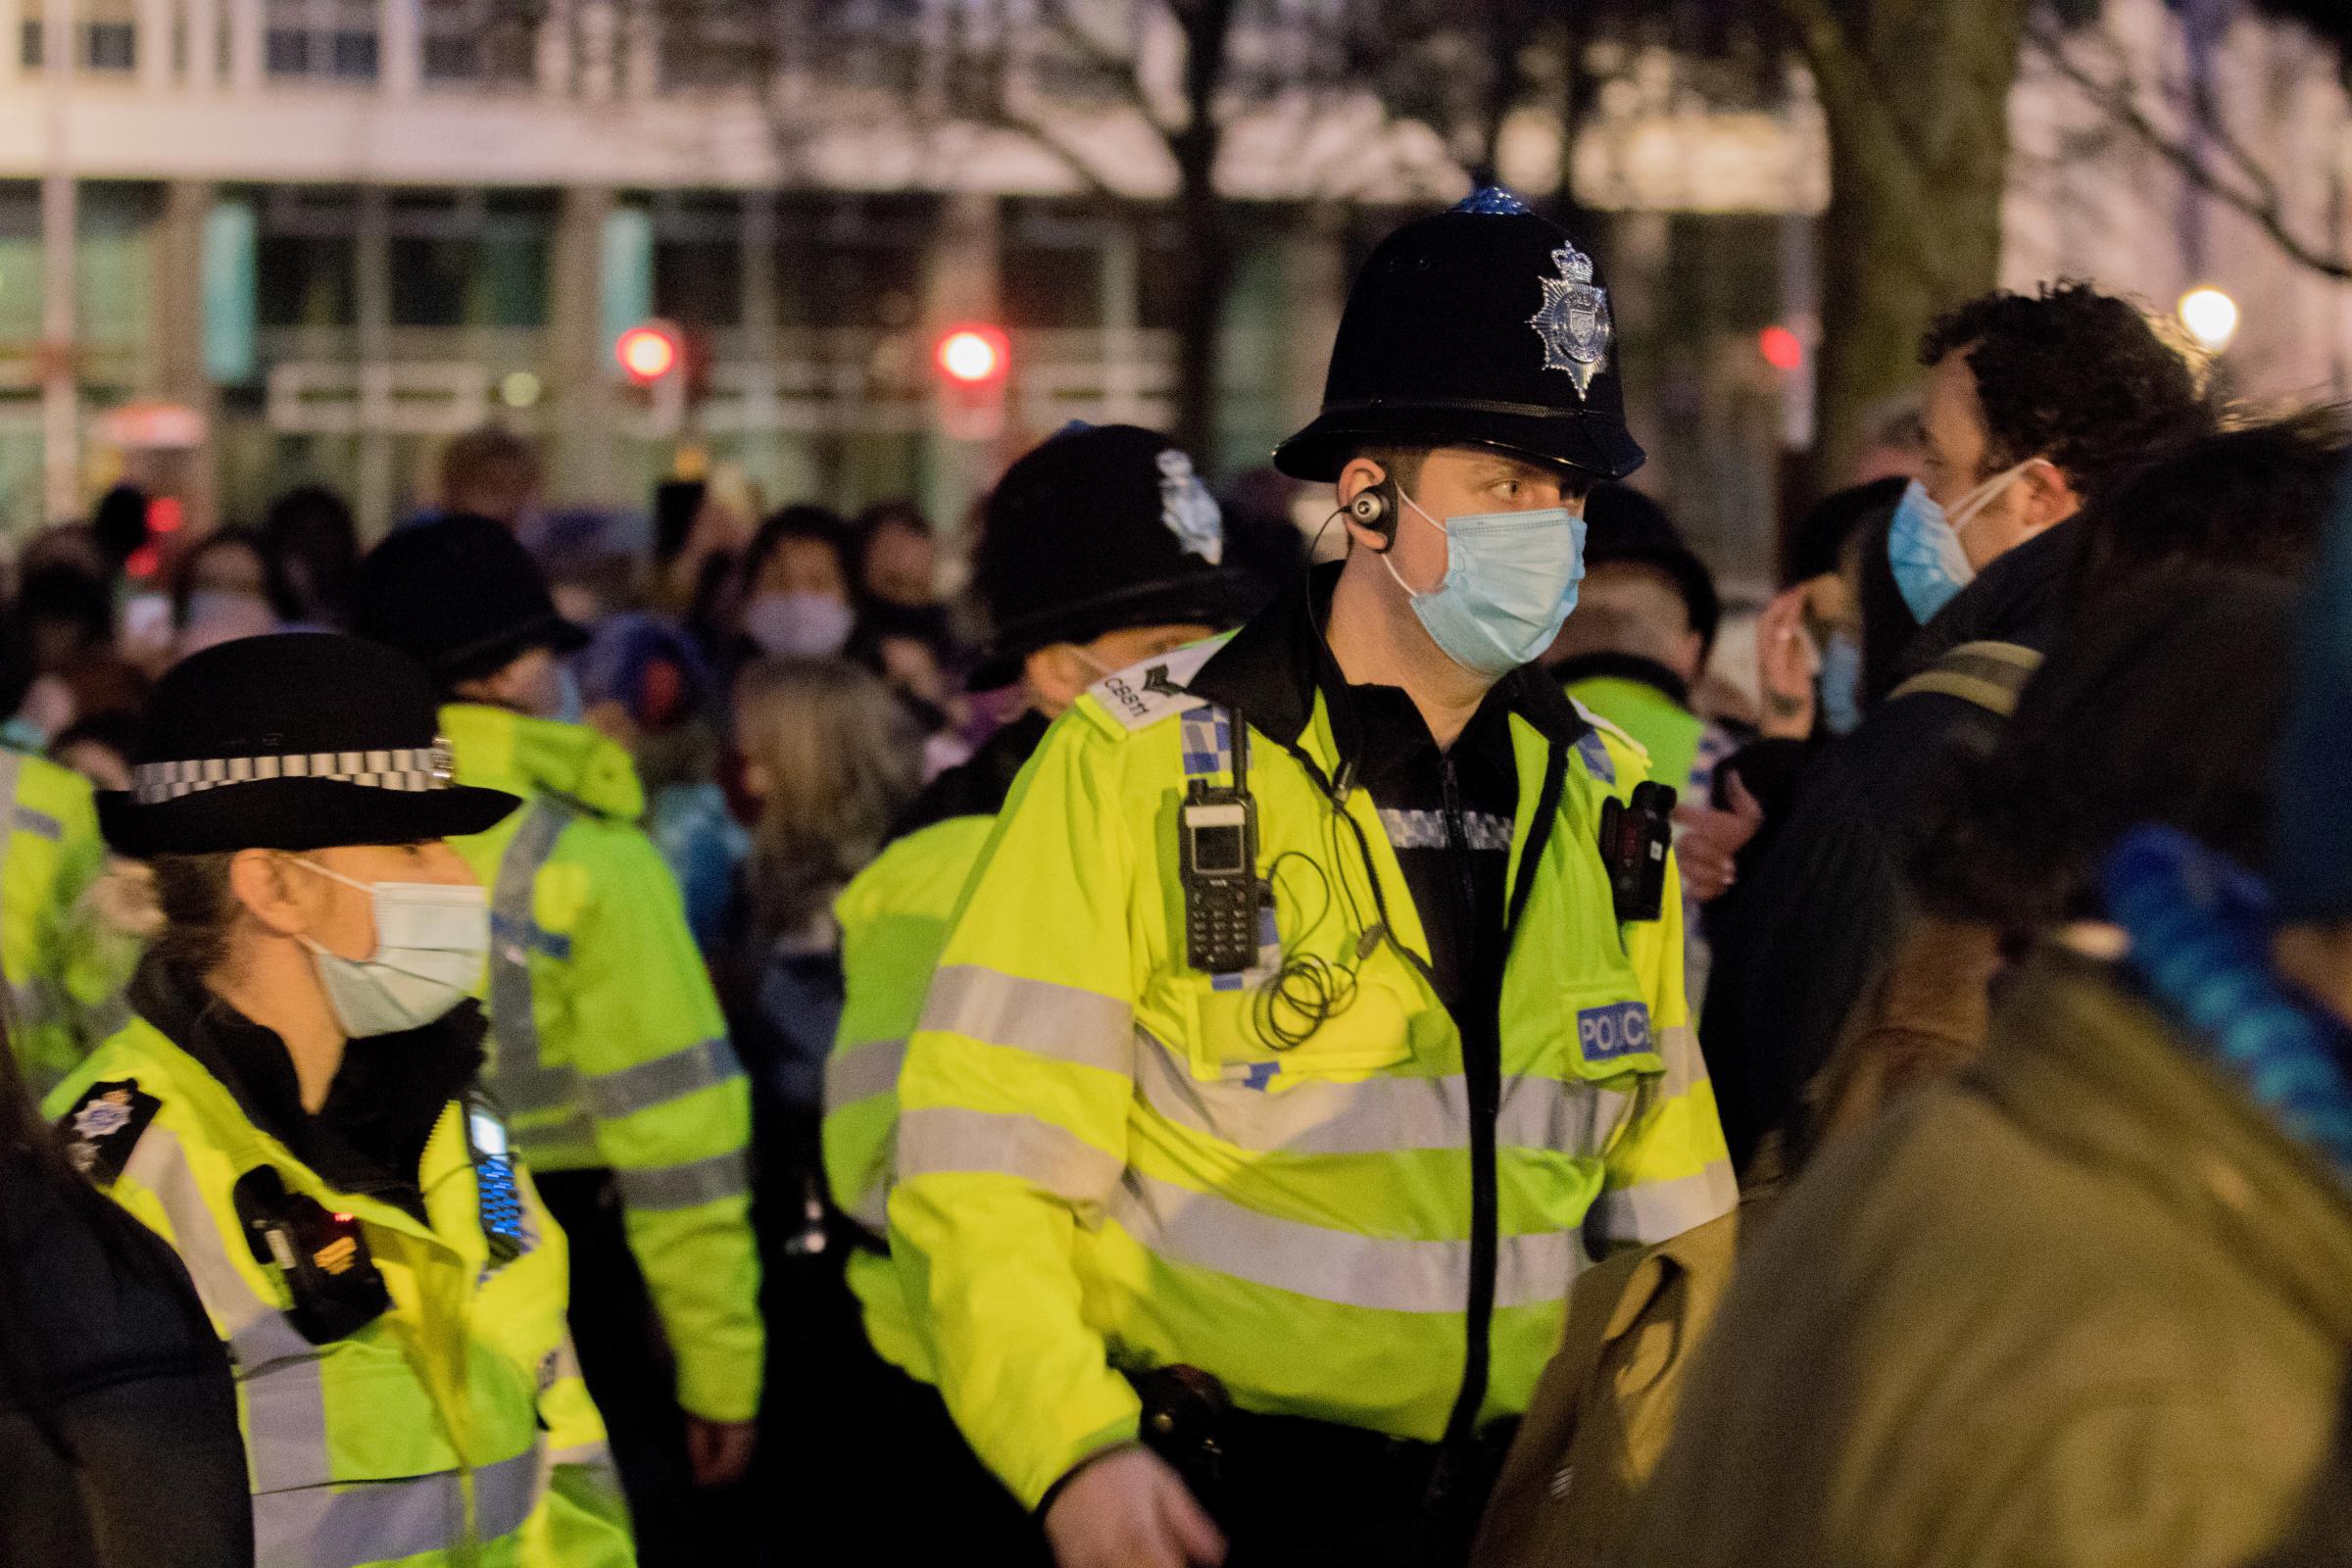 Images show the vigil held in Valley Gardens, Brighton, where police made one arrest and issued eight fines for people breaking coronavirus public health emergency rules not to attend gathings